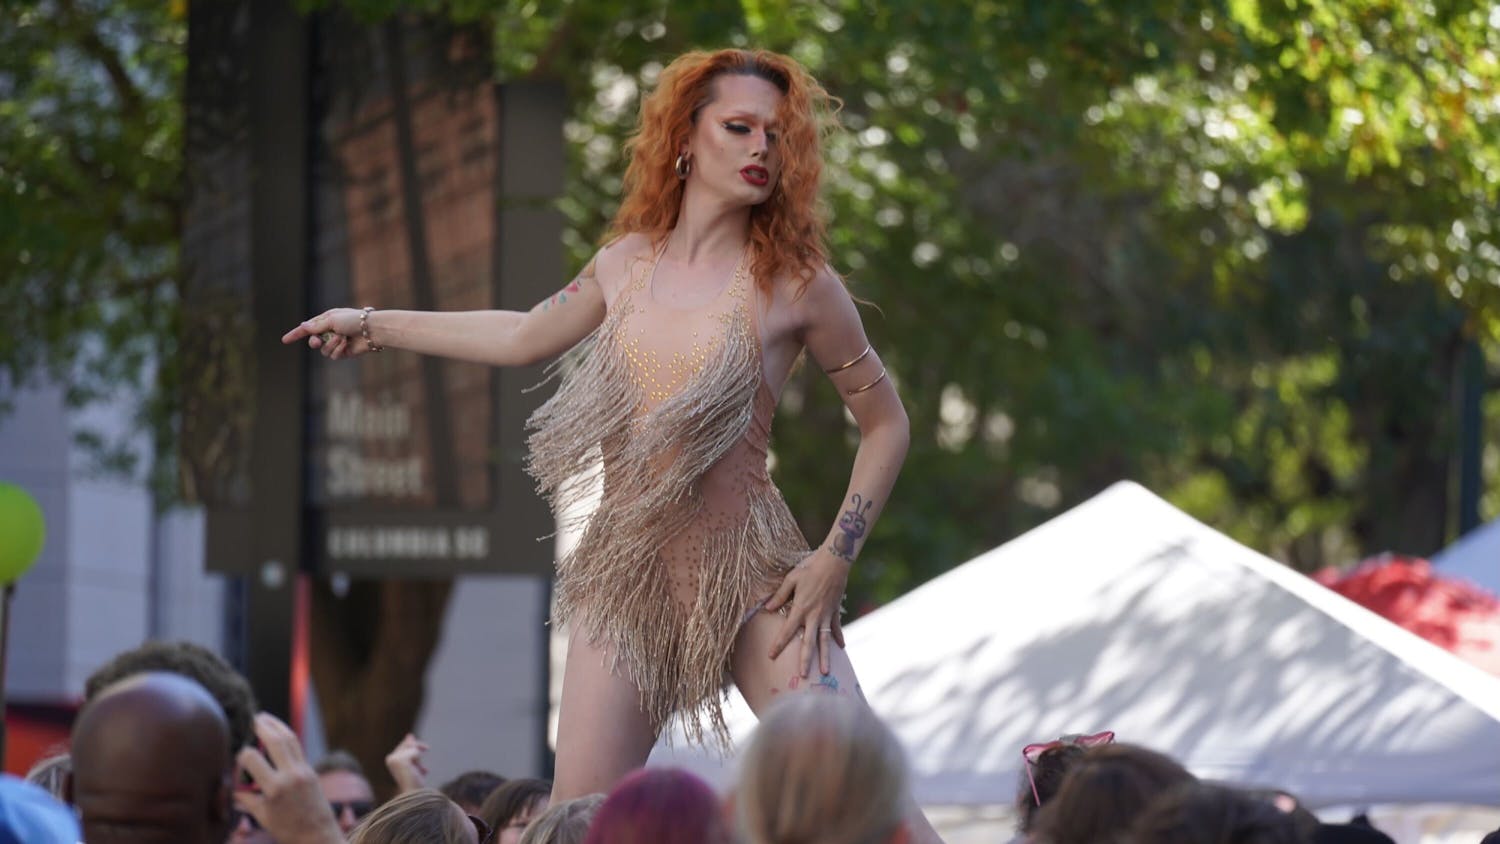 Koko Dove performs on stage during the Famously Hot South Carolina Pride Festival. Dove is a former Miss Outfest and serves as the social media/pageant coordinator for South Carolina Pride.